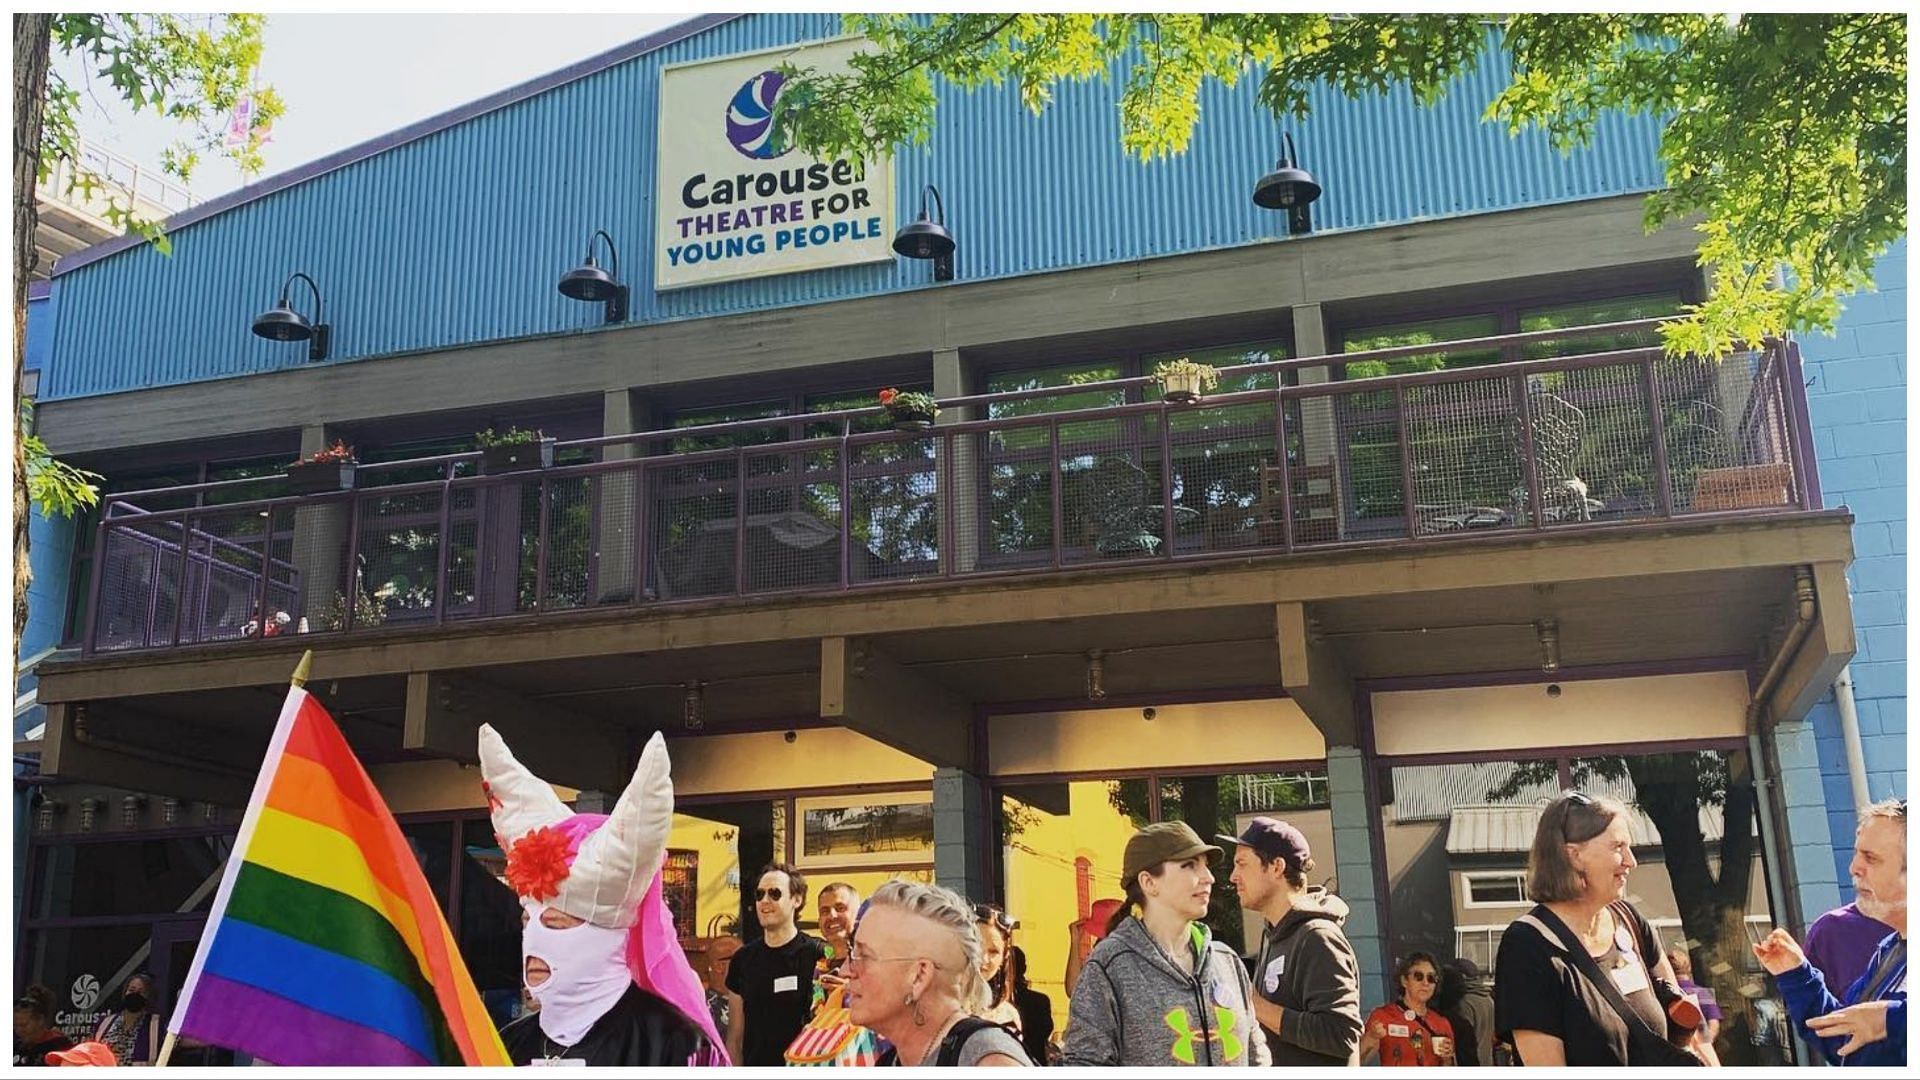 The Carousel Theatre came under fire for organizing a drag summer camp for kids (Image via Instagram/@christineeboyle)